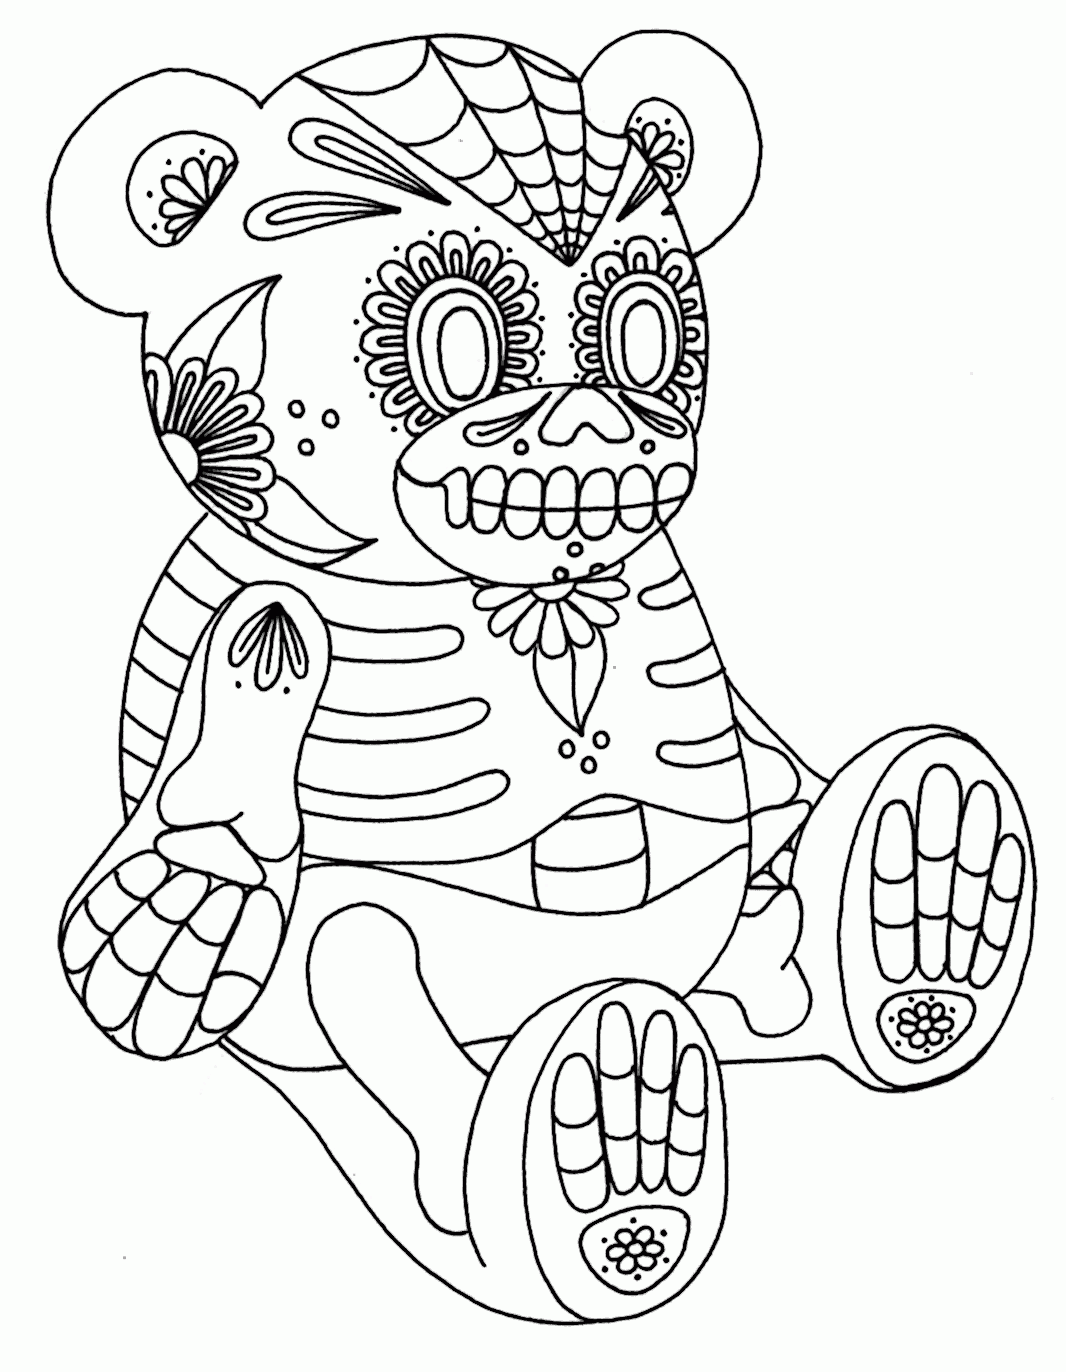 15 Pics of Sugar Skull Coloring Pages Wolf - Day of Dead Sugar ...